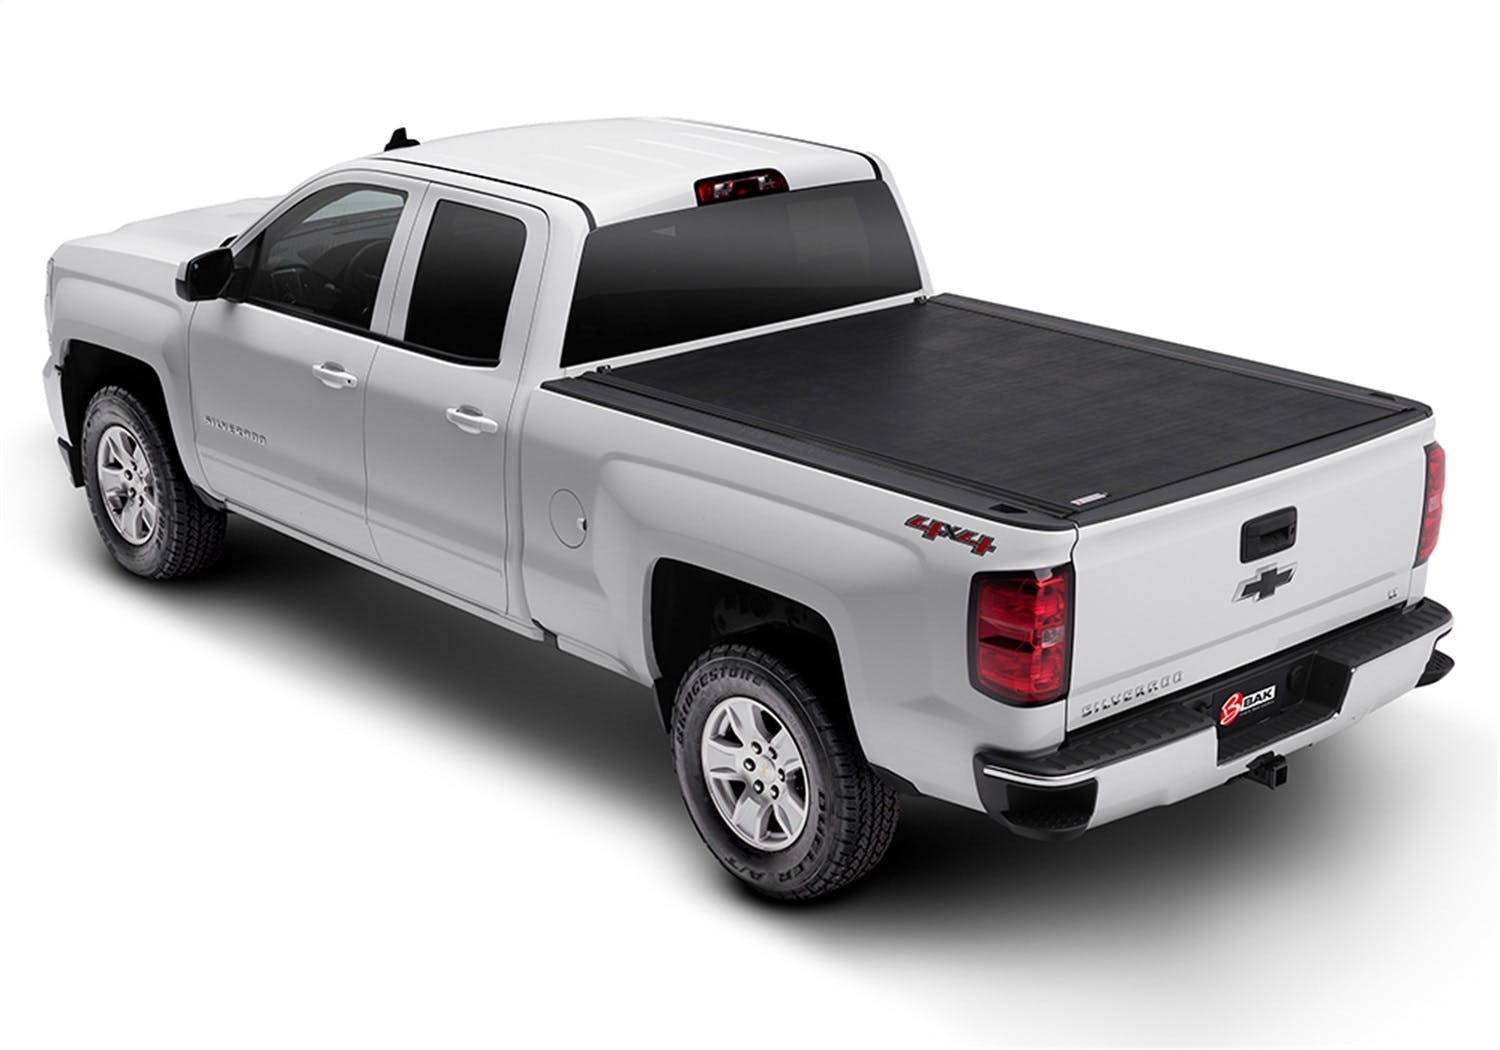 BAK Industries 39102 Revolver X2 Hard Rolling Truck Bed Cover